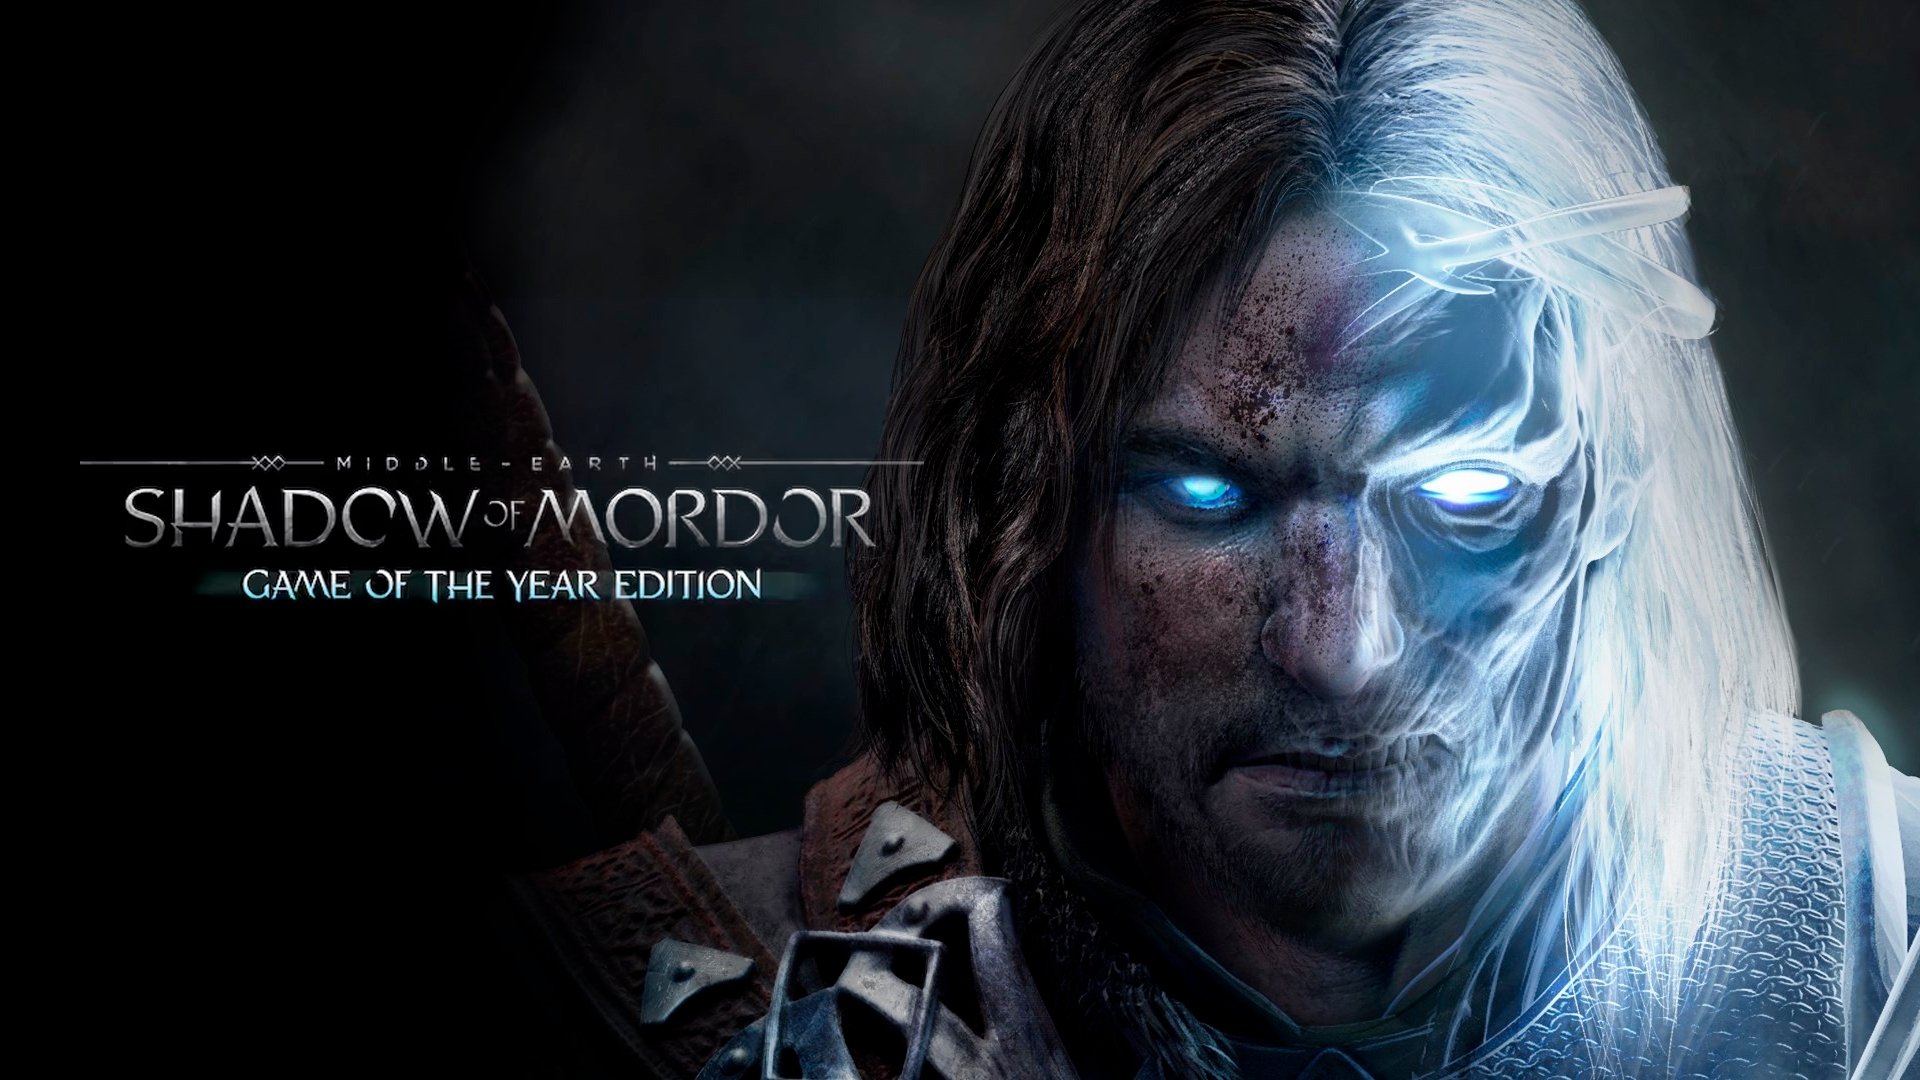 Middle-earth: Shadow of Mordor (Xbox One, Xbox 360, PlayStation 4